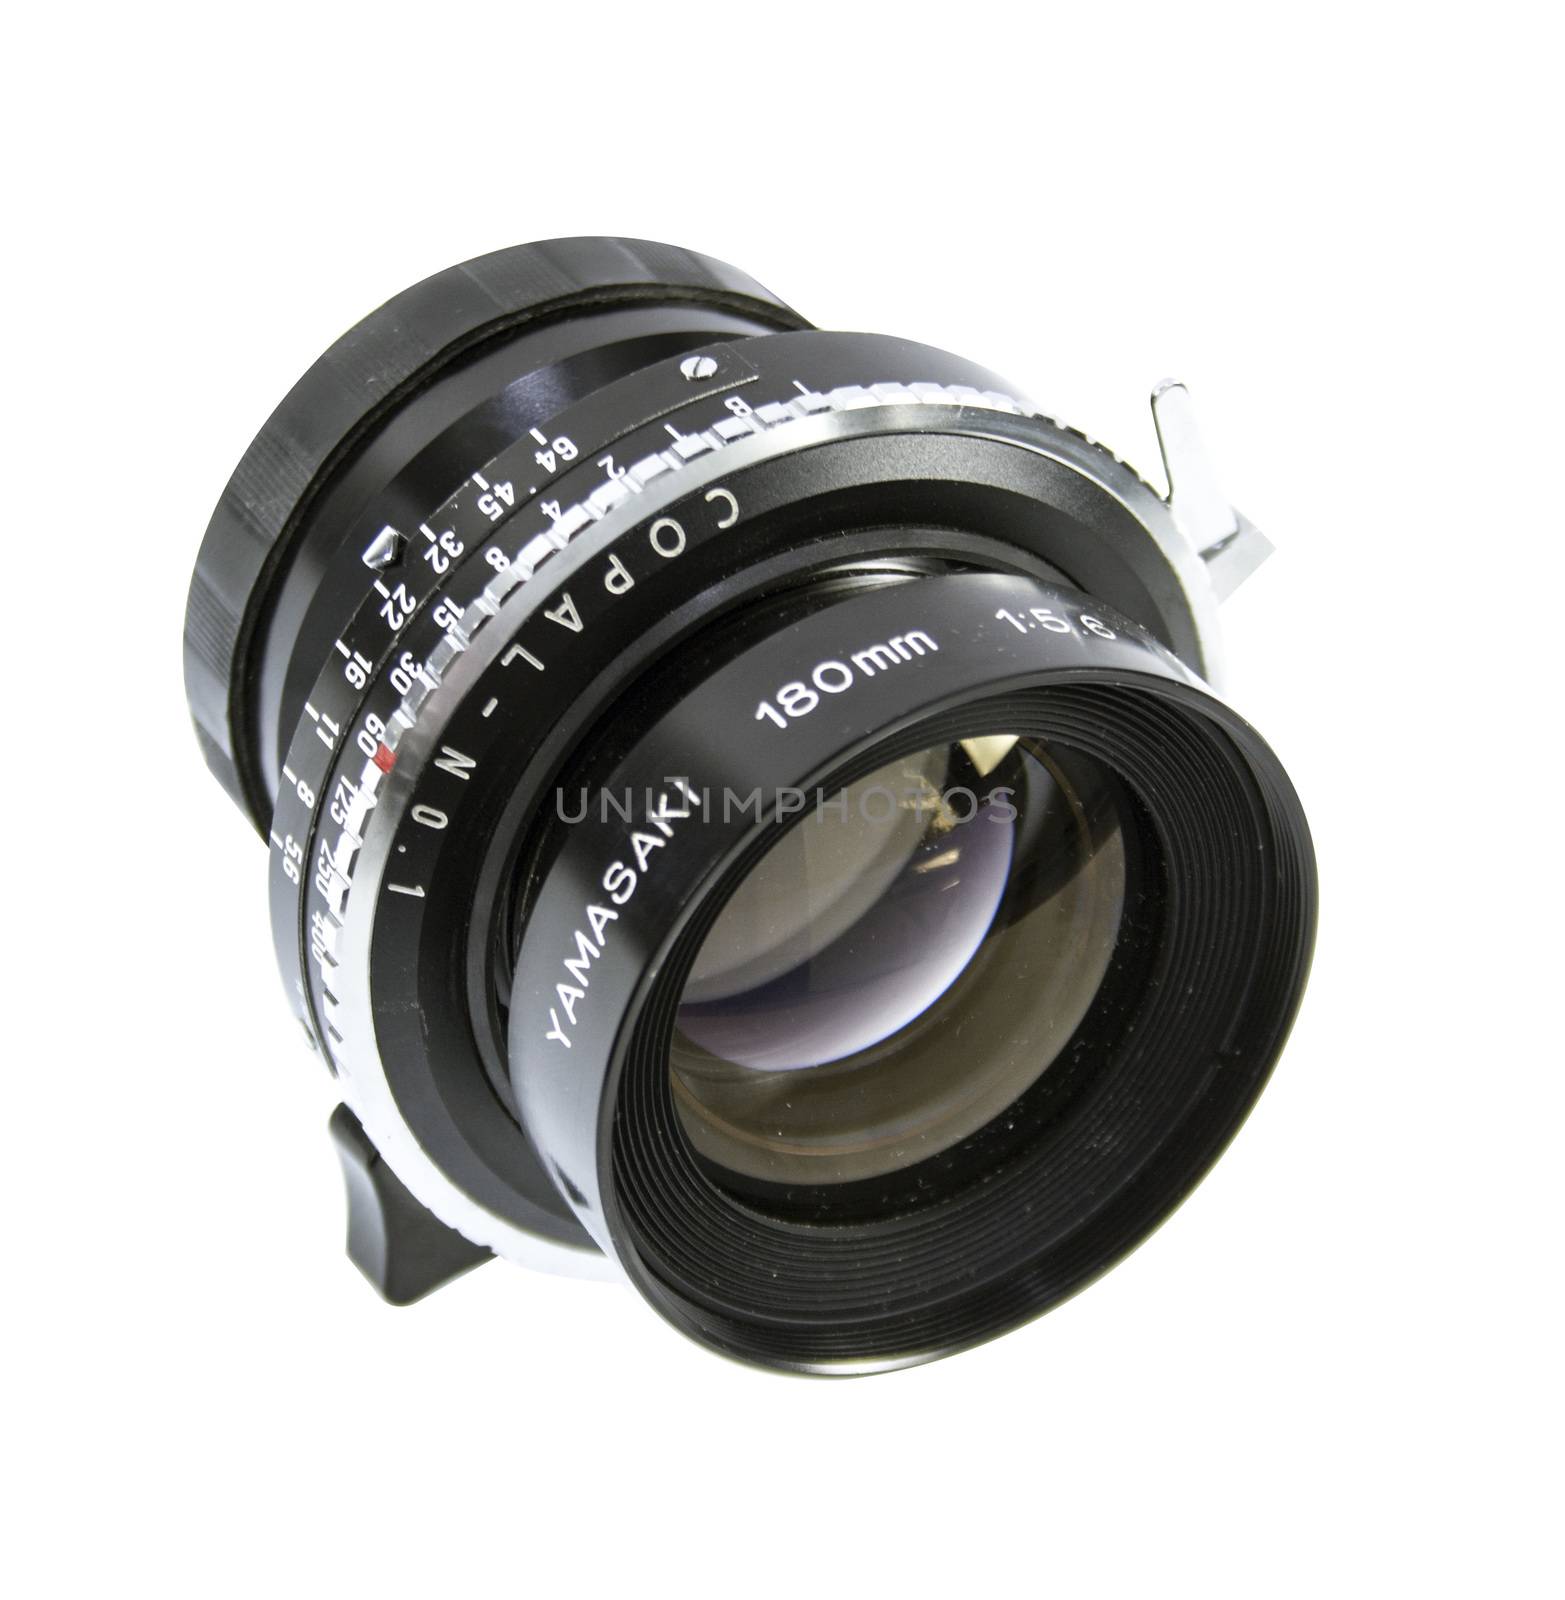 An old manual control camera lens isolated on white.